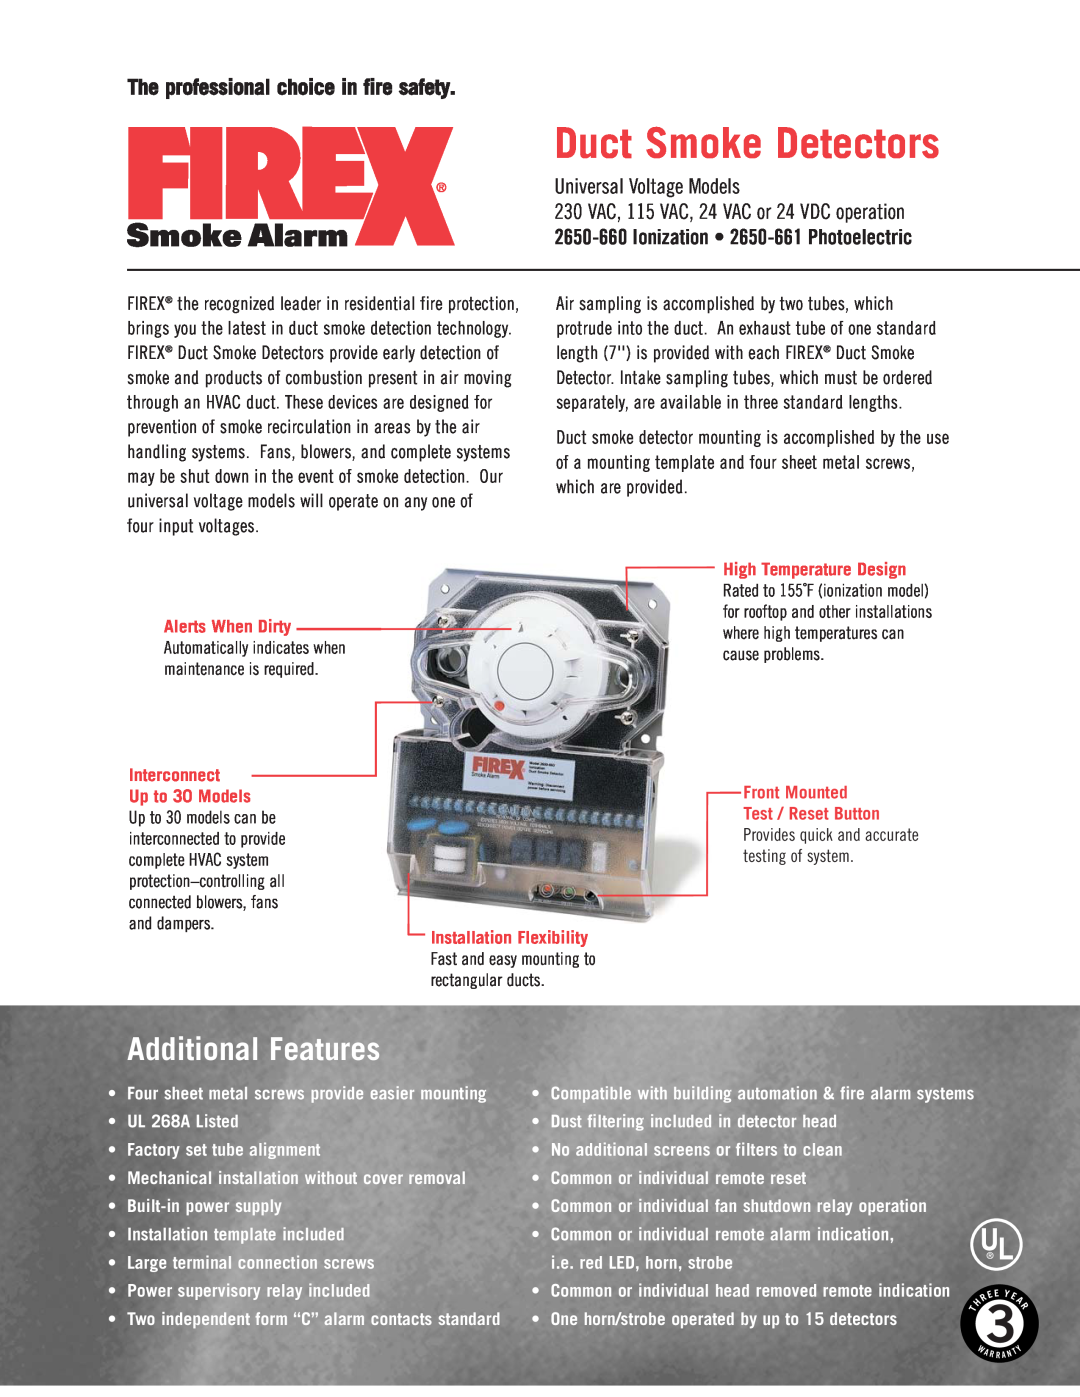 Firex 2650-660 warranty Duct Smoke Detectors, Additional Features, The professional choice in fire safety, Interconnect 